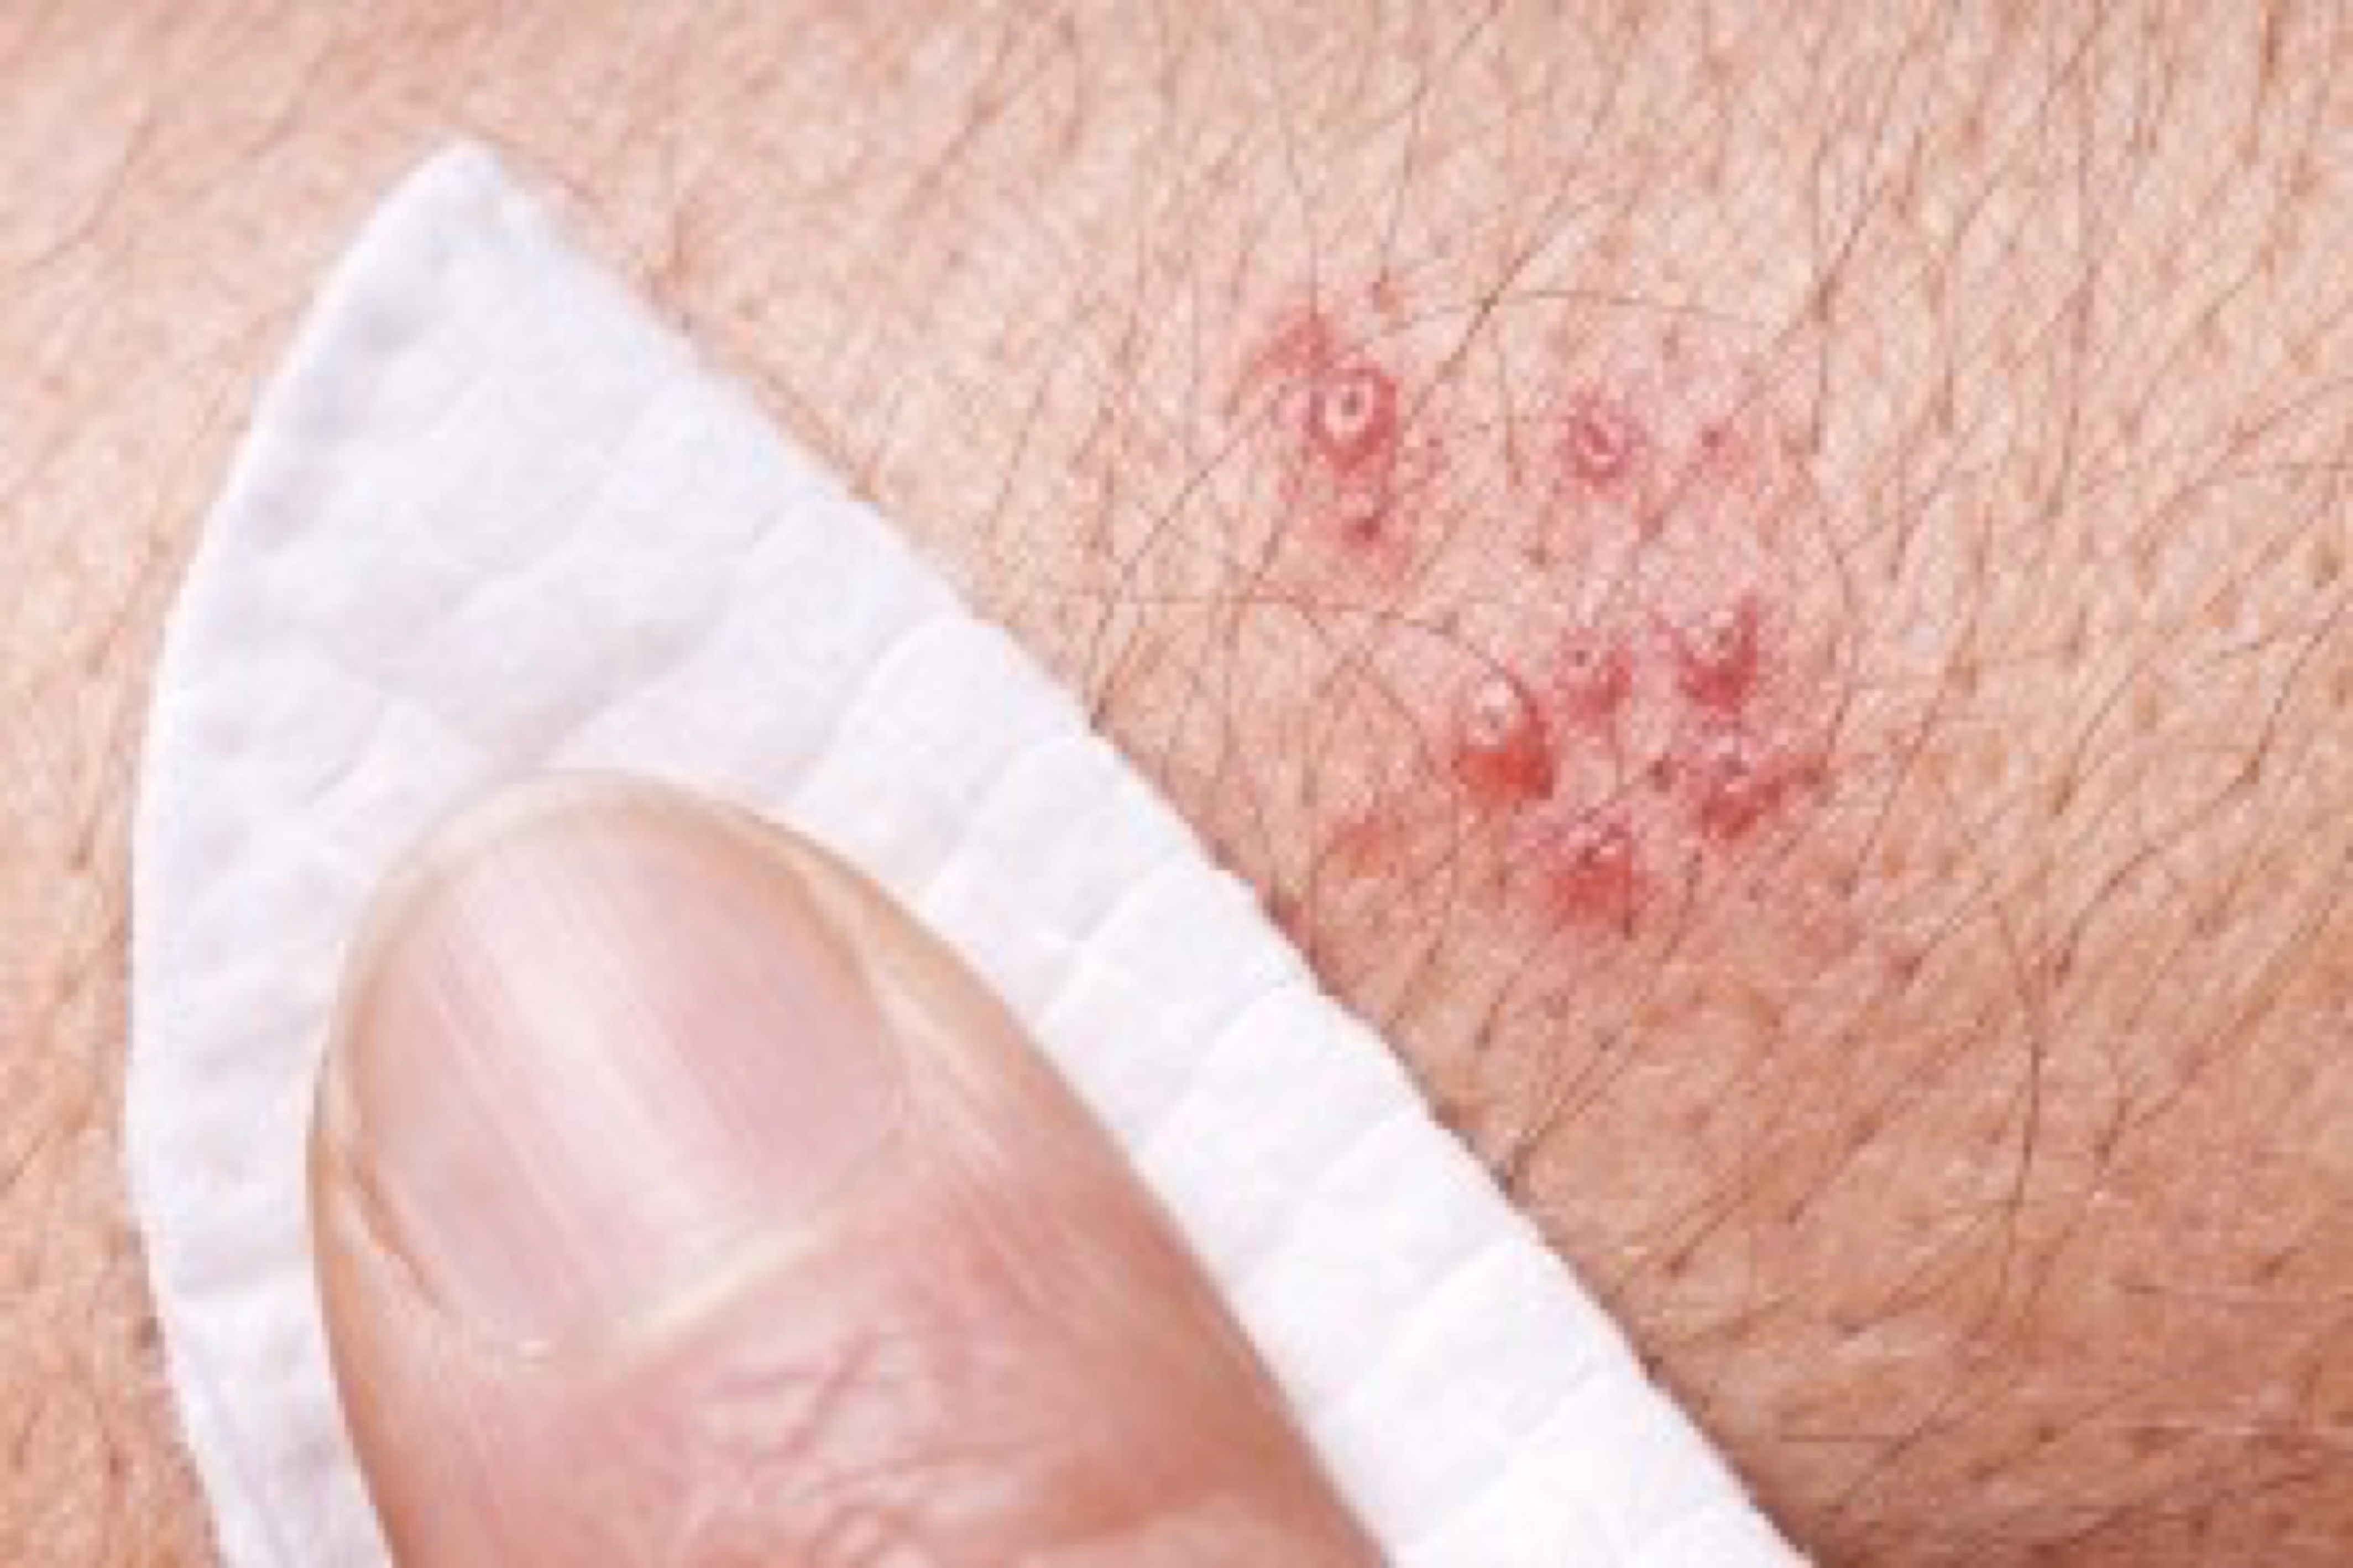 Stress levels or herpes zoster (shingles) rash with blisters on the left hand